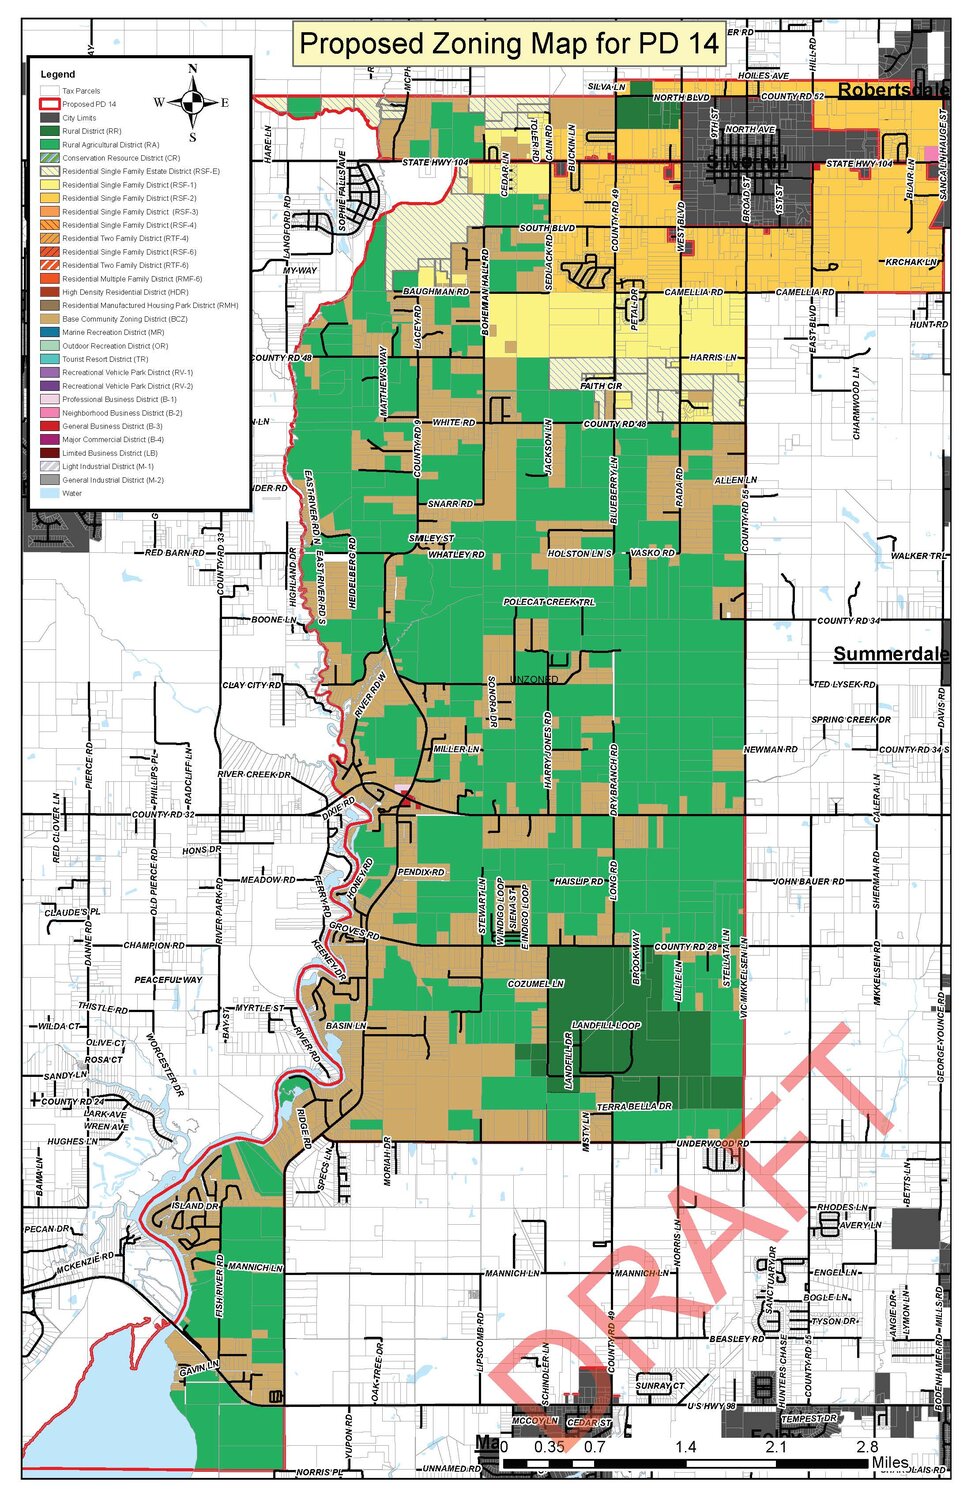 The district 14 draft map that is being reviewed by the planning committee. While numerous topics remain on the agenda, the committee continues to work toward its goal to shape the district's future development in the way its residents deem appropriate.